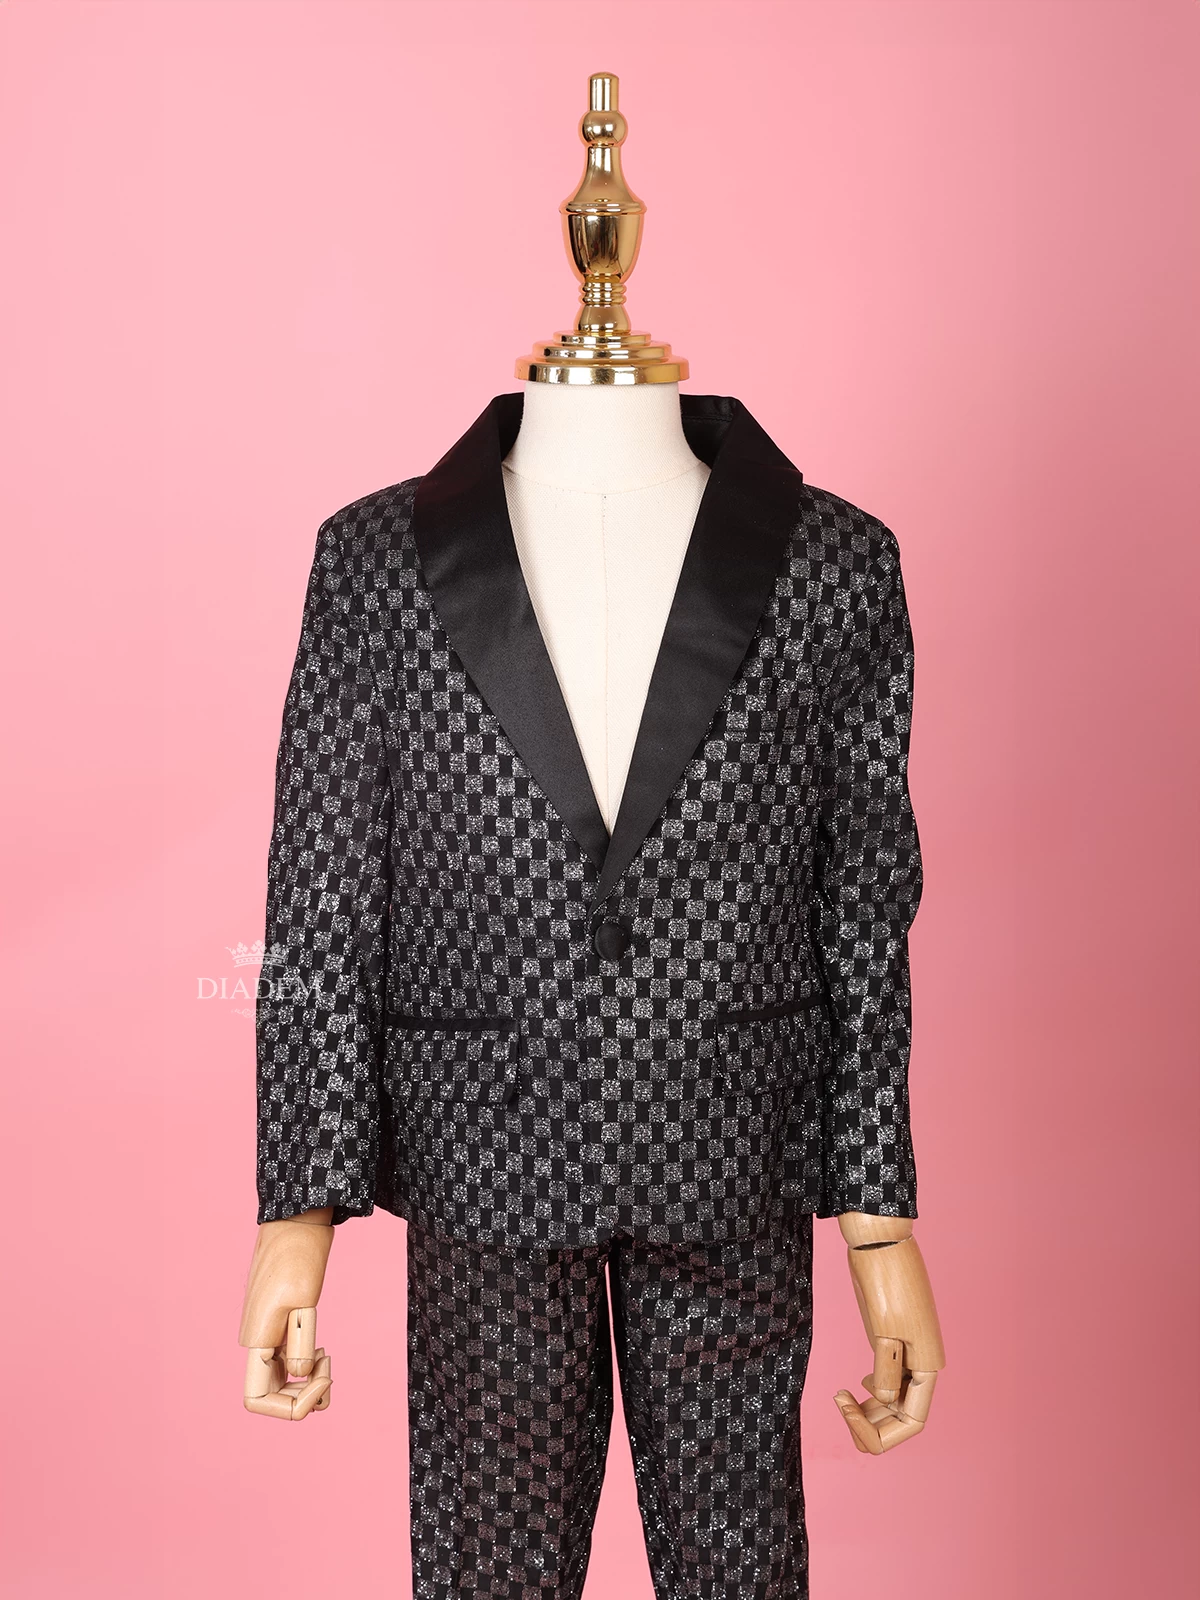 Black And Silver Shimmer Tuxedo With Checked Pattern Coat Suit For Boys